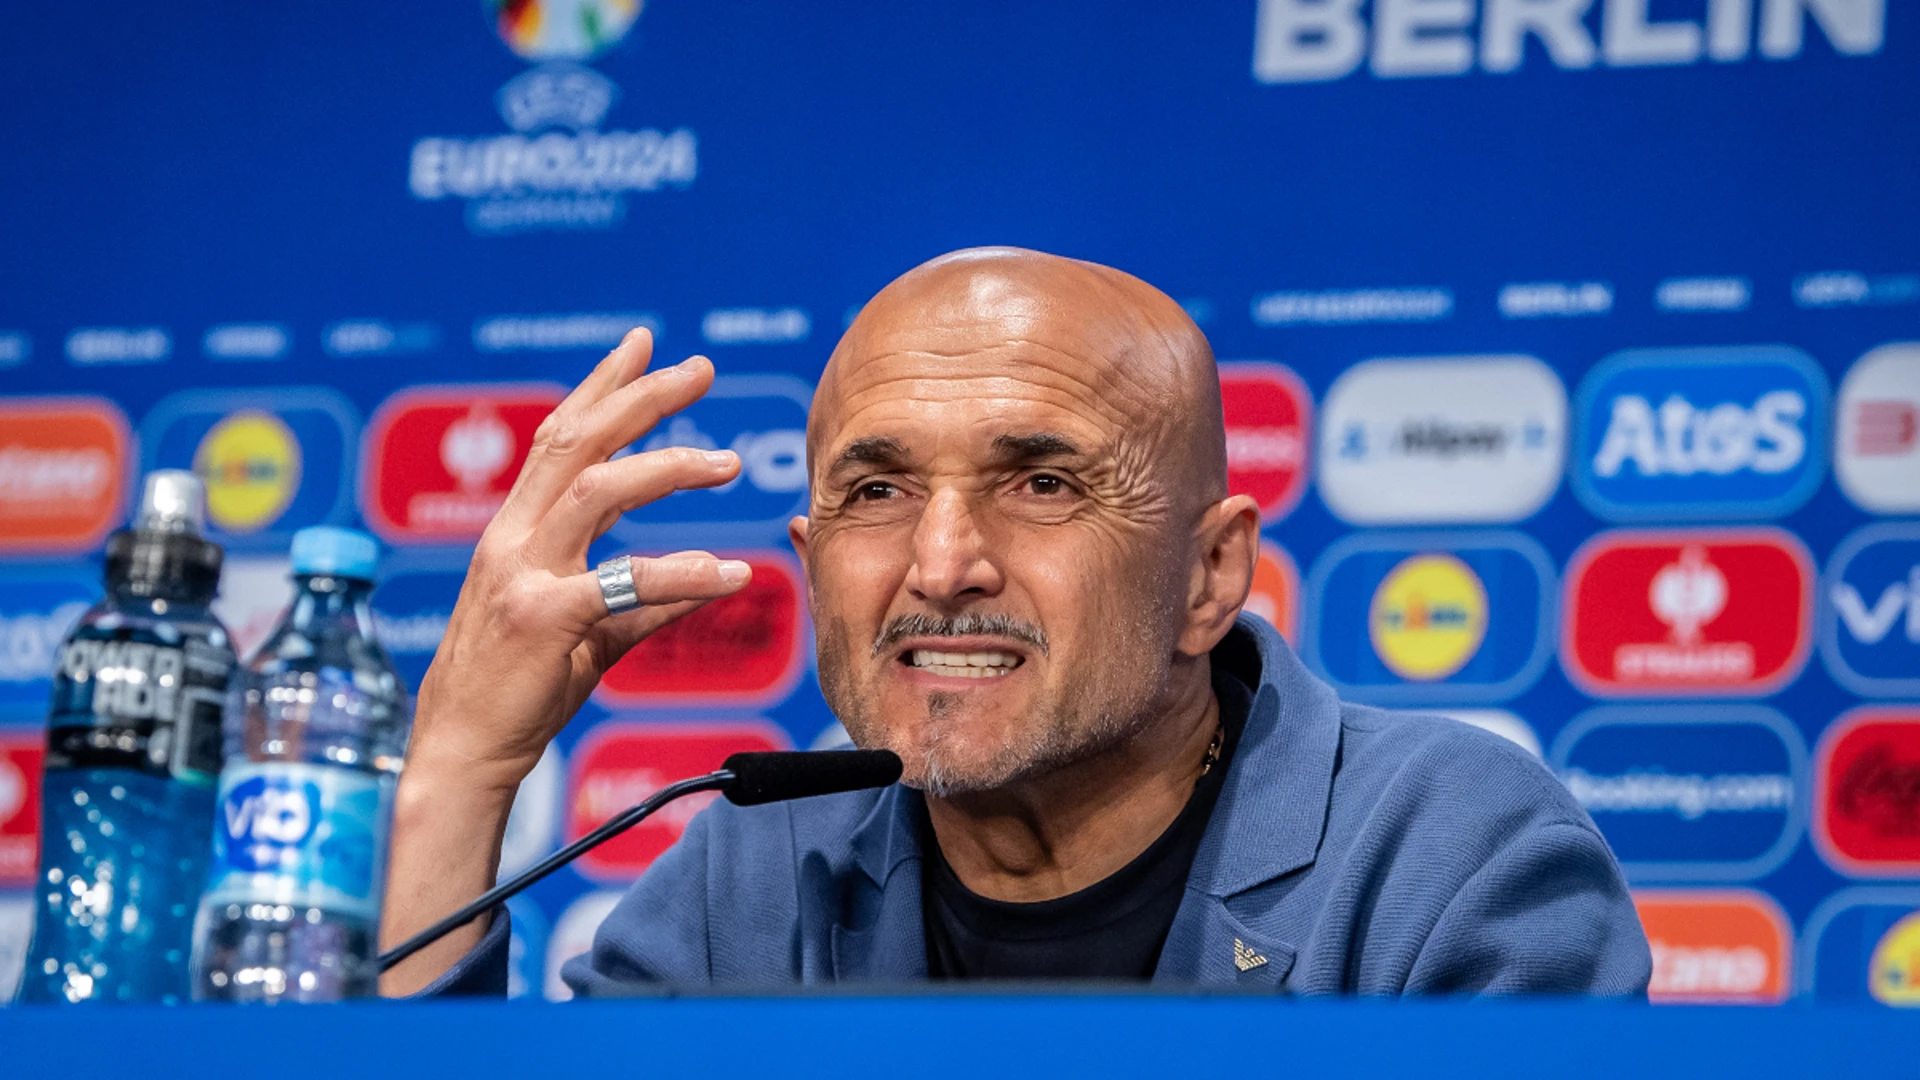 Italy have no alternative but to improve at Euros: coach Spalletti